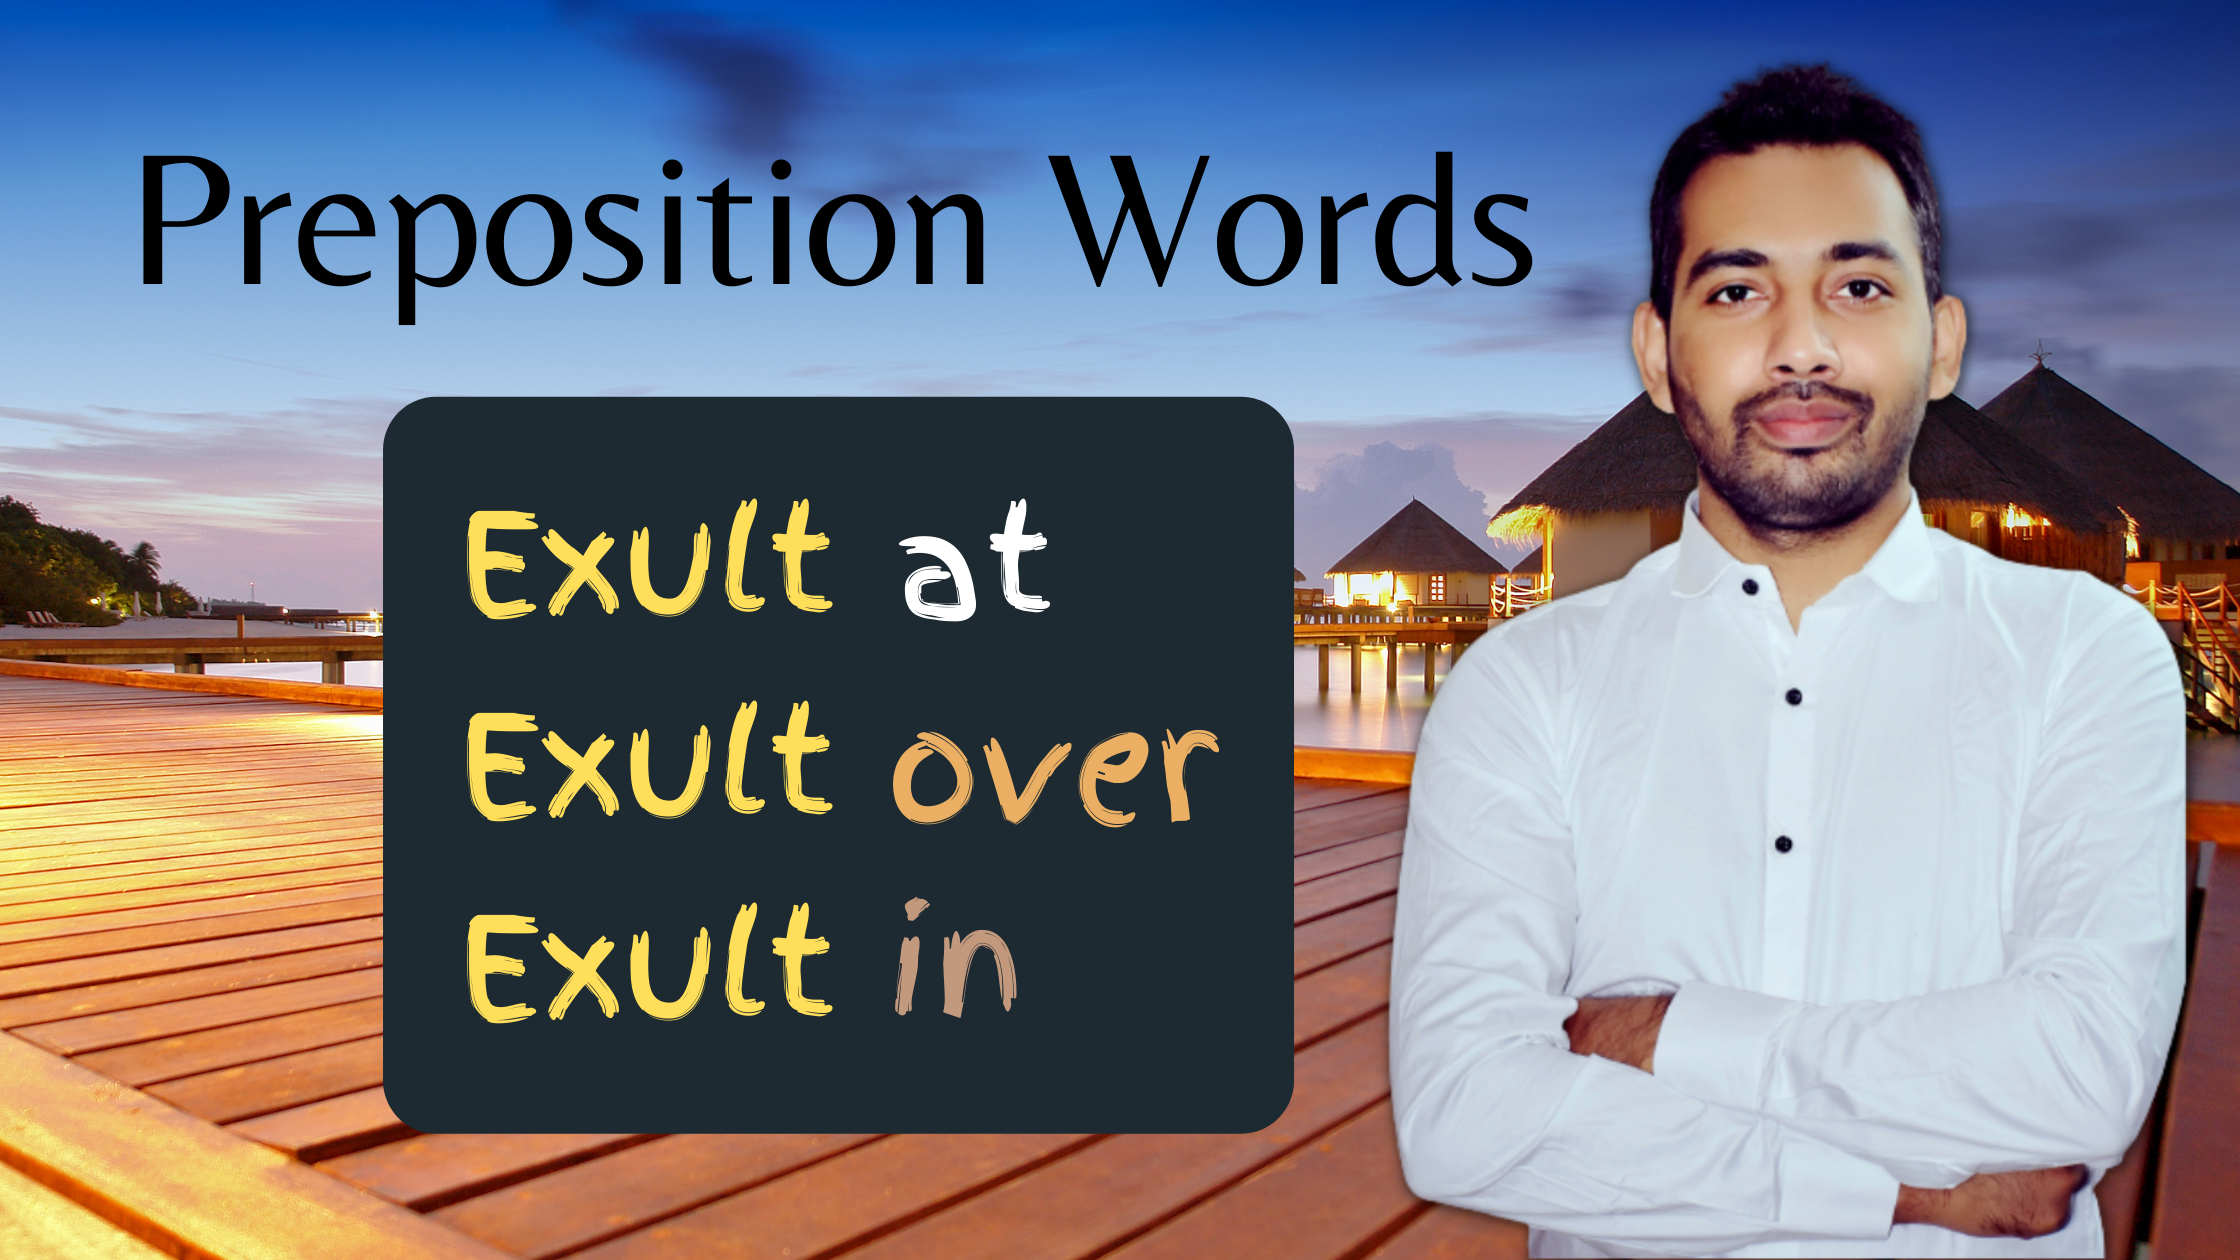 Preposition words with exult